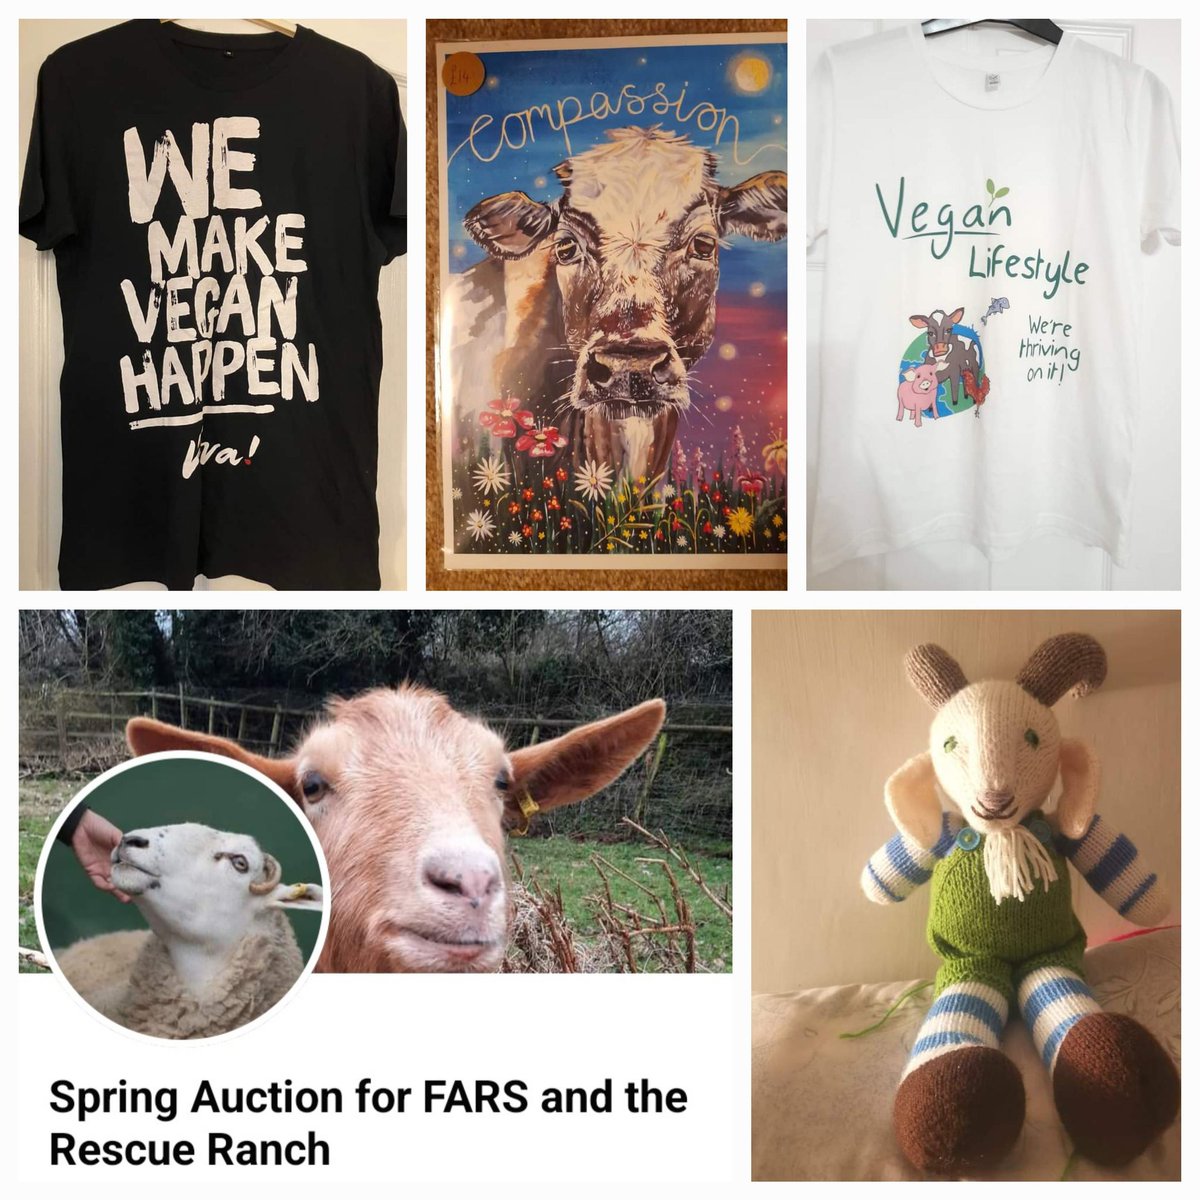 🌷 FARS SPRING AUCTION! 🌷 2 of our volunteers (Caroline & Debbie 🤗) have put together a stunning online auction in aid of FARS 🐑🐖🐔 & our lovely neighbours The Rescue Ranch 🐐 Do have a browse over on Facebook (apologies if you're not a FB user 😔) 🛒 facebook.com/share/hrzh8Jss…